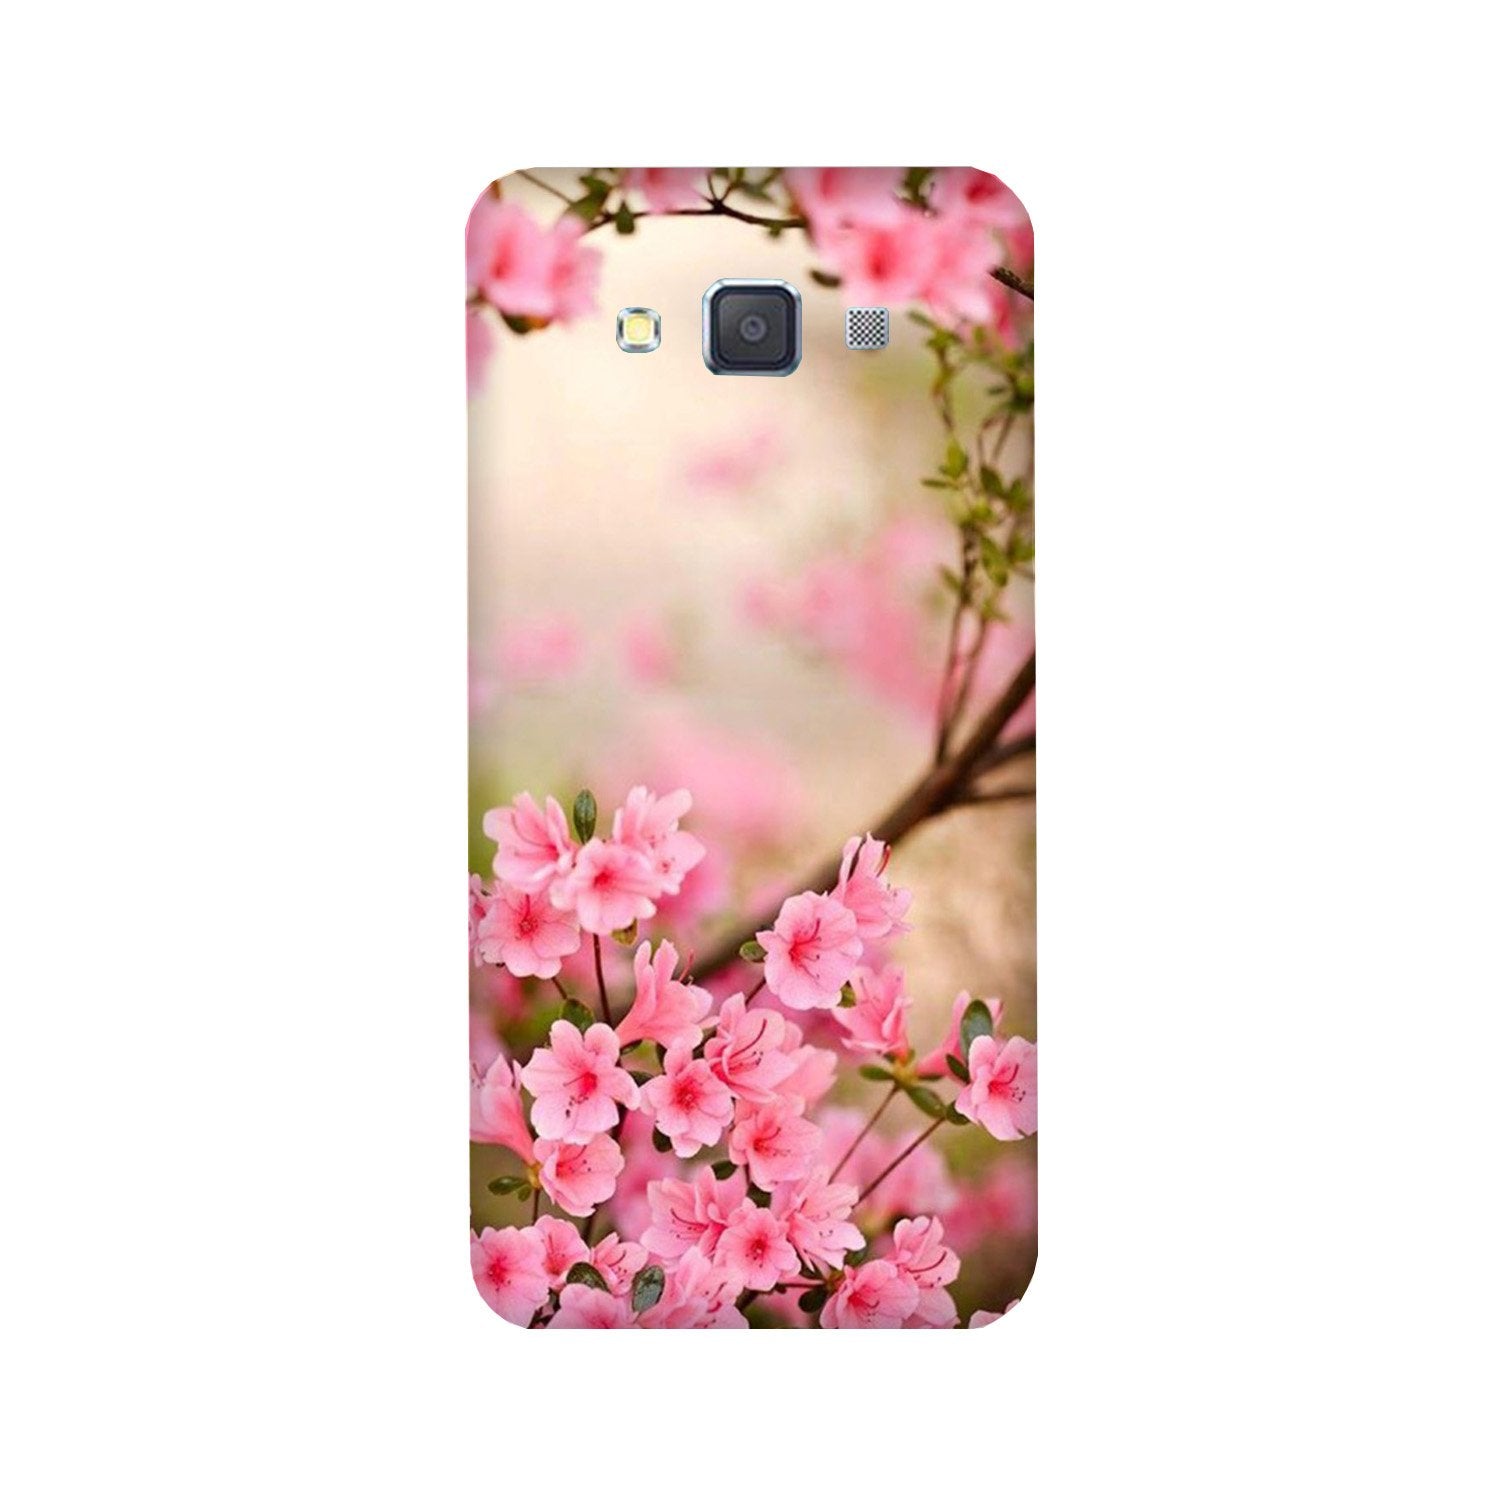 Pink flowers Case for Galaxy J5 (2016)